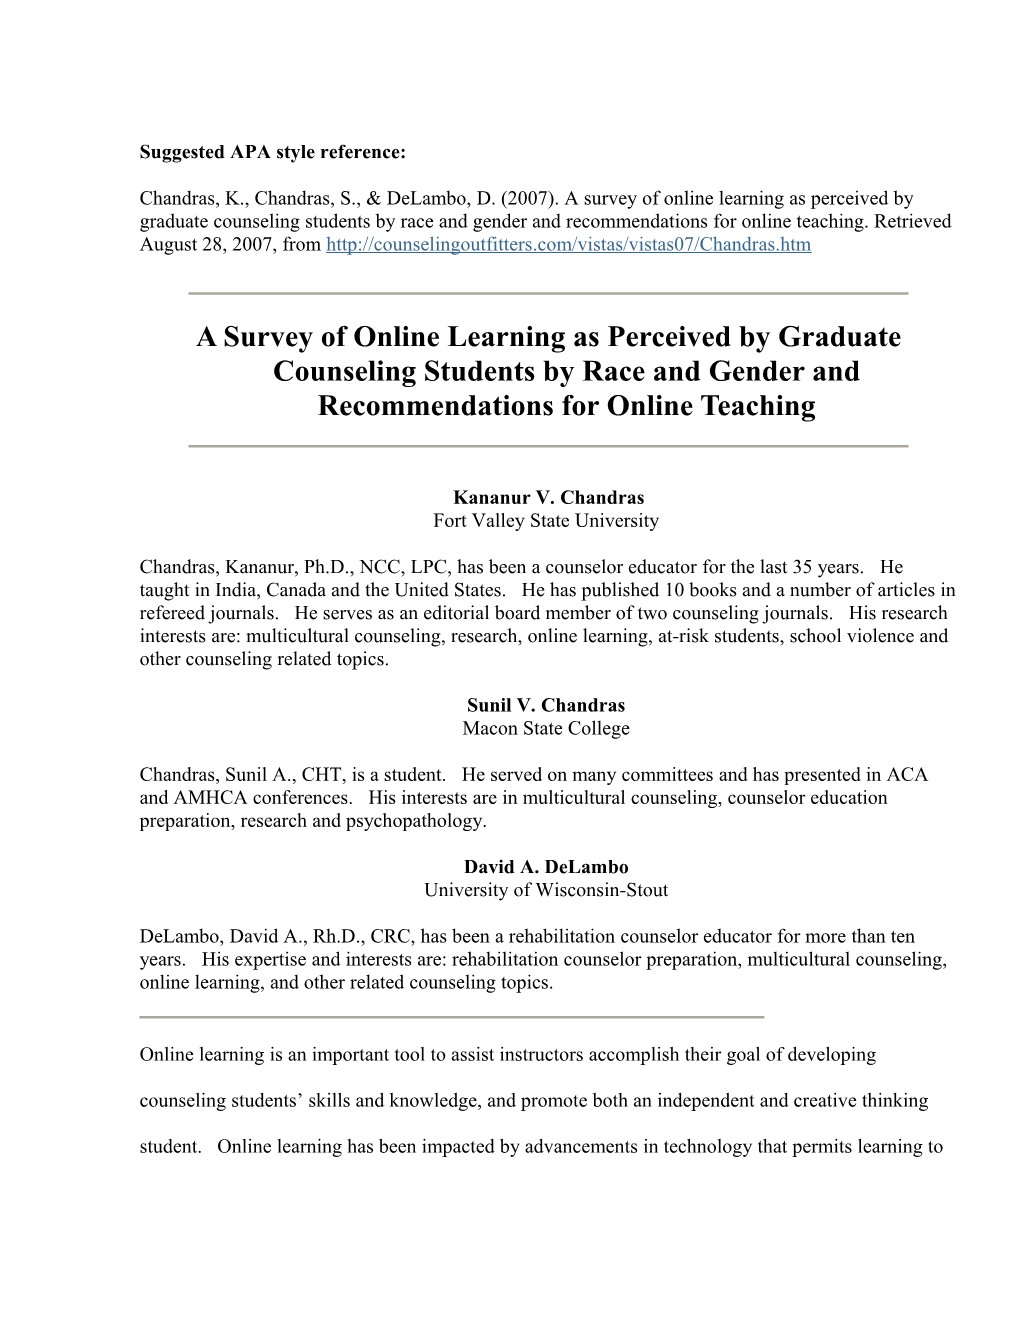 A Survey of Online Learning As Perceived by Graduate Counseling Students by Race and Gender